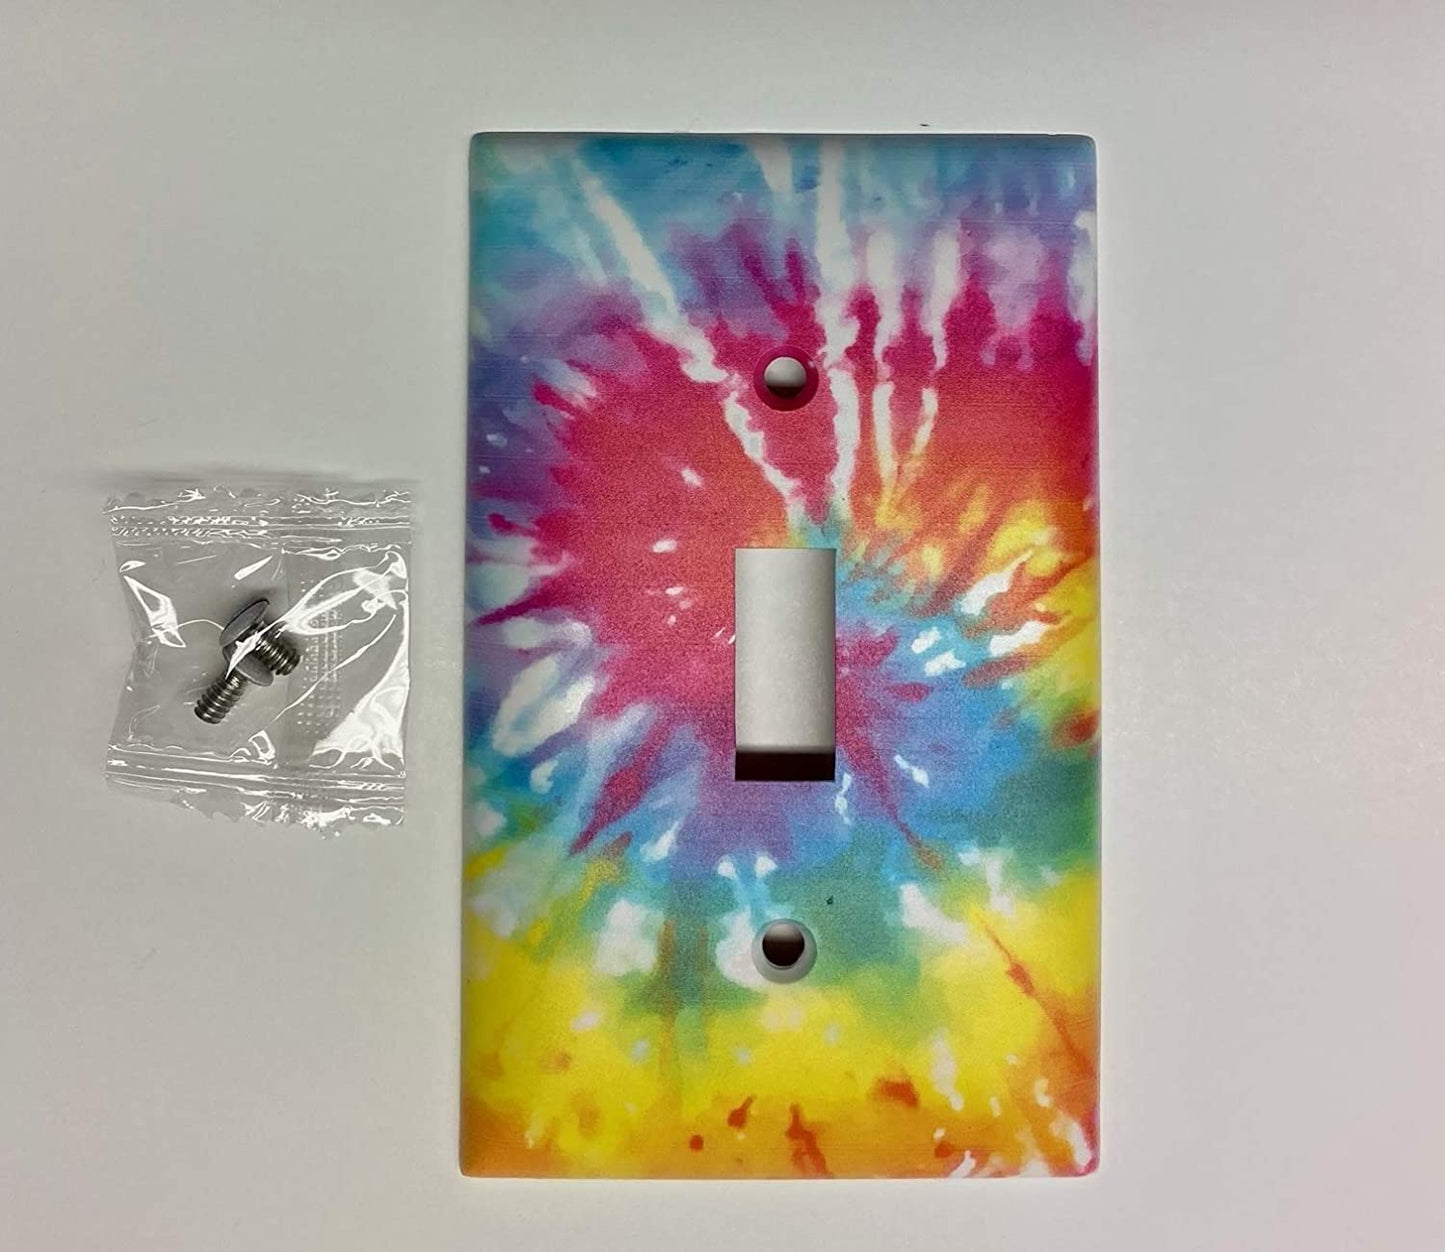 Tie Dye, Plastic Single Toggle Light Plate Switch Wall Plate, 2.75 x 4.5 inches